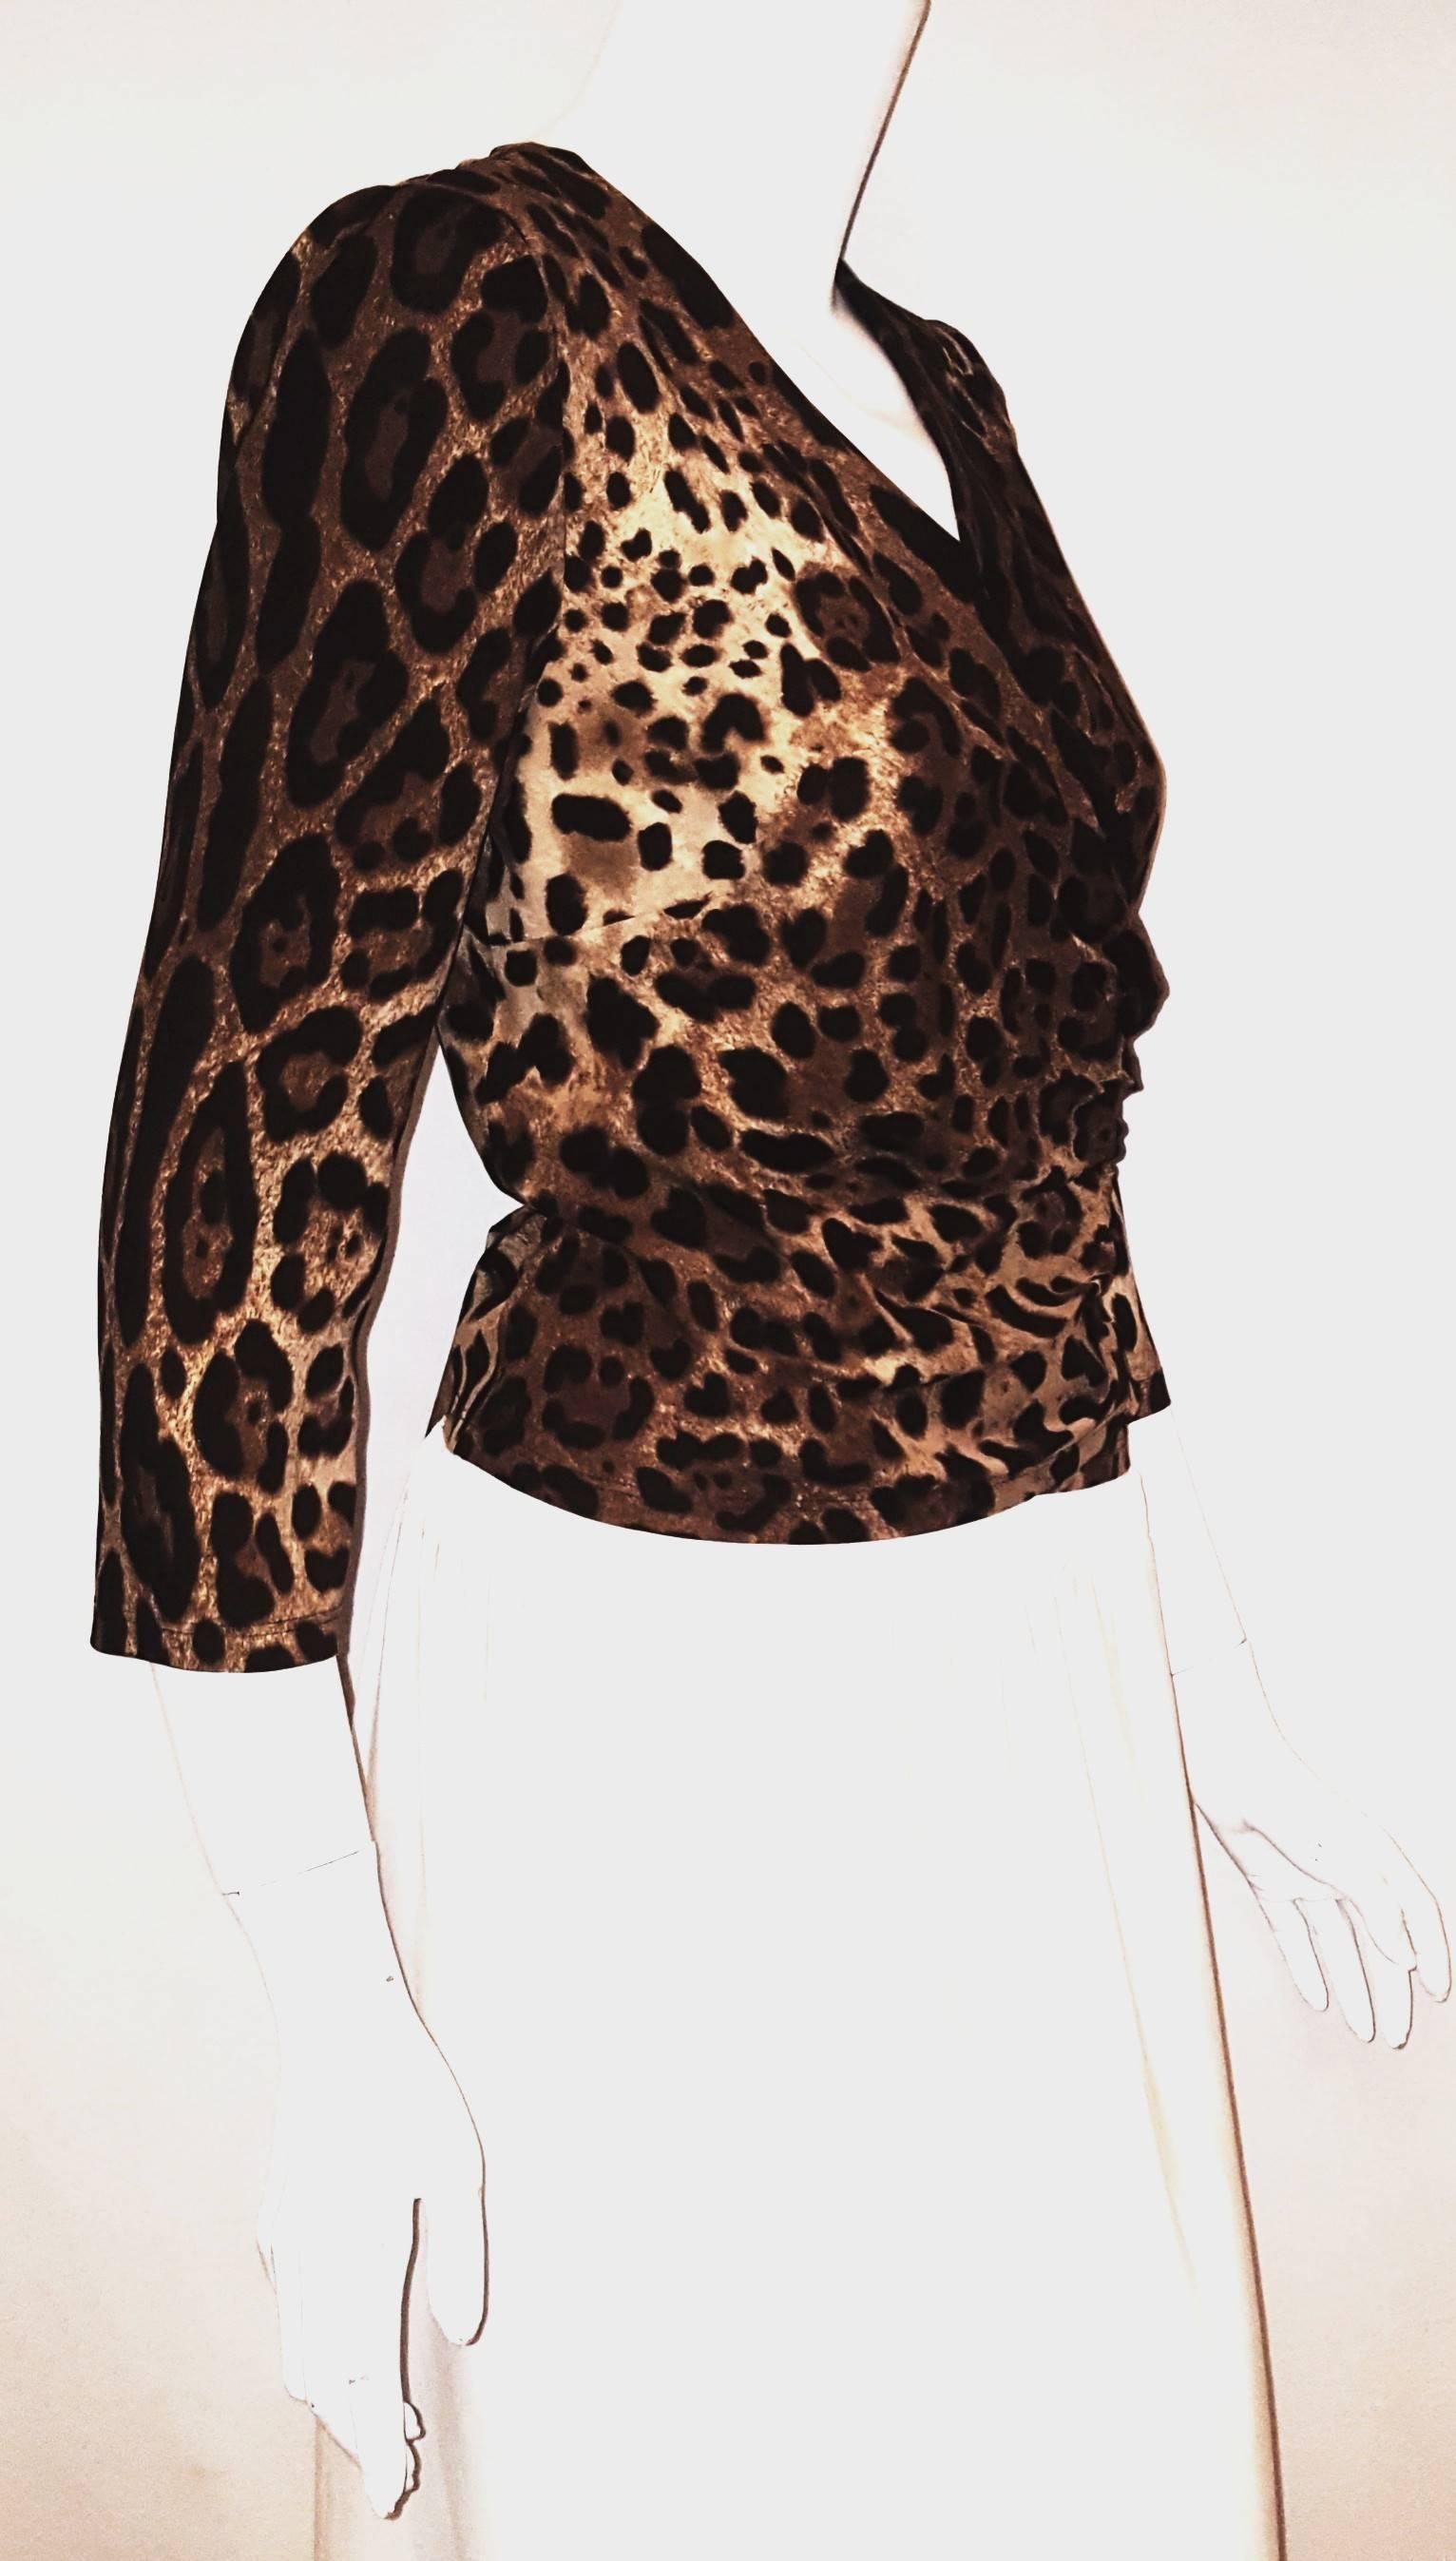 Dolce & Gabbana silk leopard print in brown and beige hues wrap blouse with 3/4 sleeves and v neckline is casual but easy transforms to evening when paired with the right accessories, skirt or pants!  For closure there are long adjustable sashes